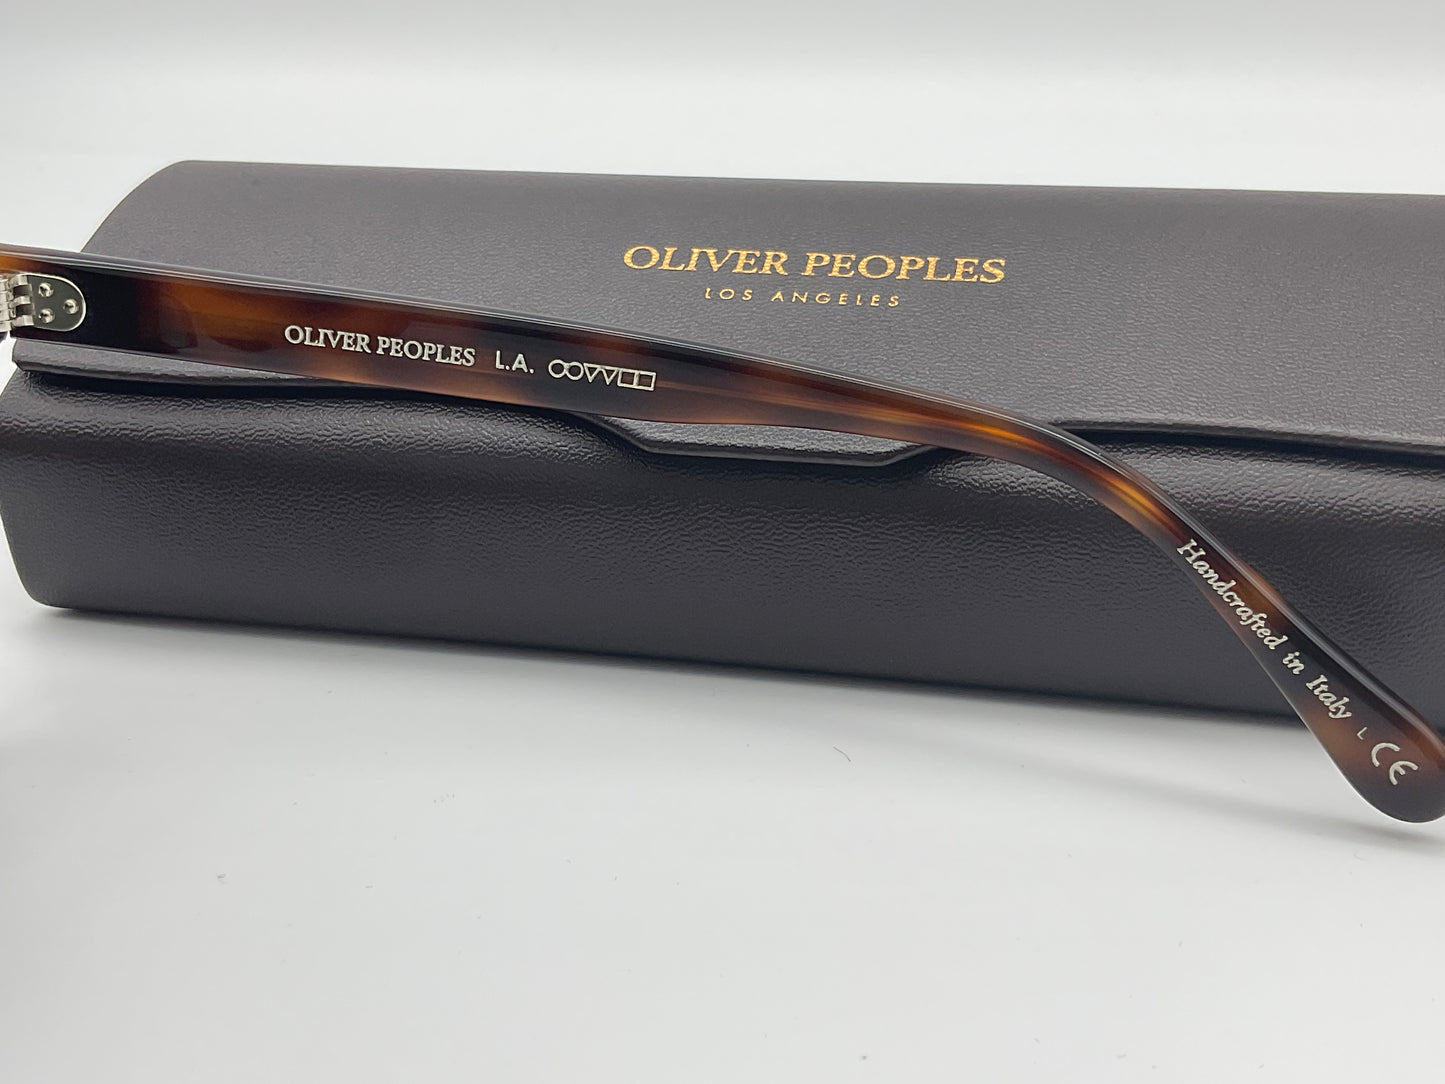 Oliver Peoples Daddy B. 55 mm tortoise made in Italy